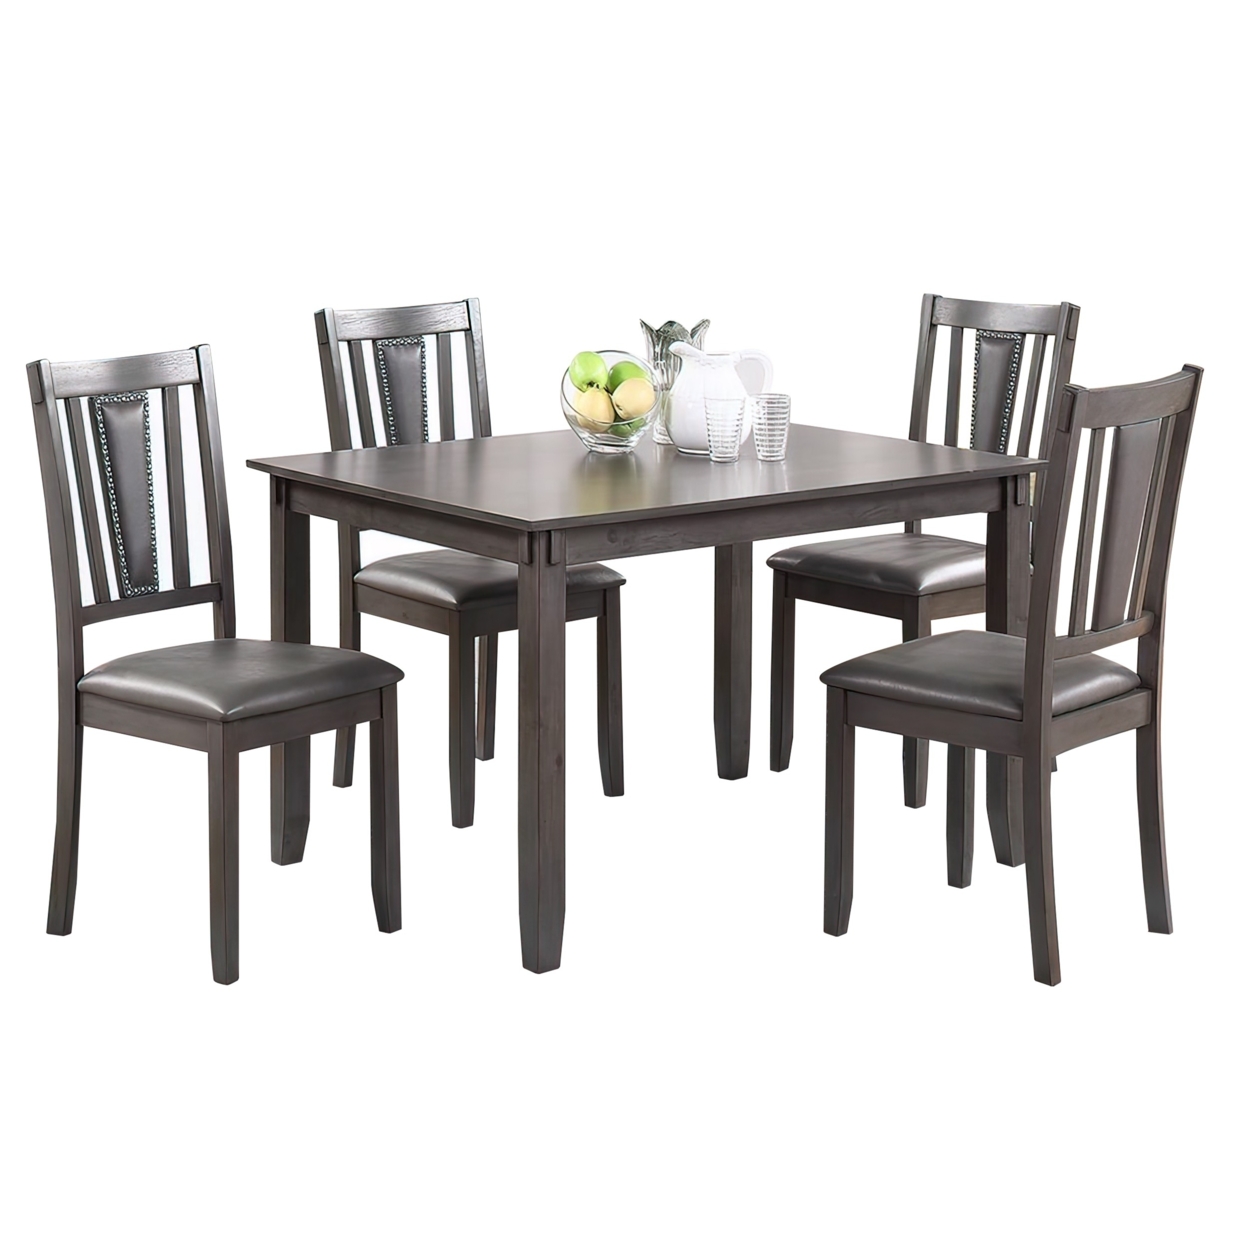 Modern 5 Piece Dining Set With Table, 4 Chairs, Cushioned, Gray And Brown- Saltoro Sherpi